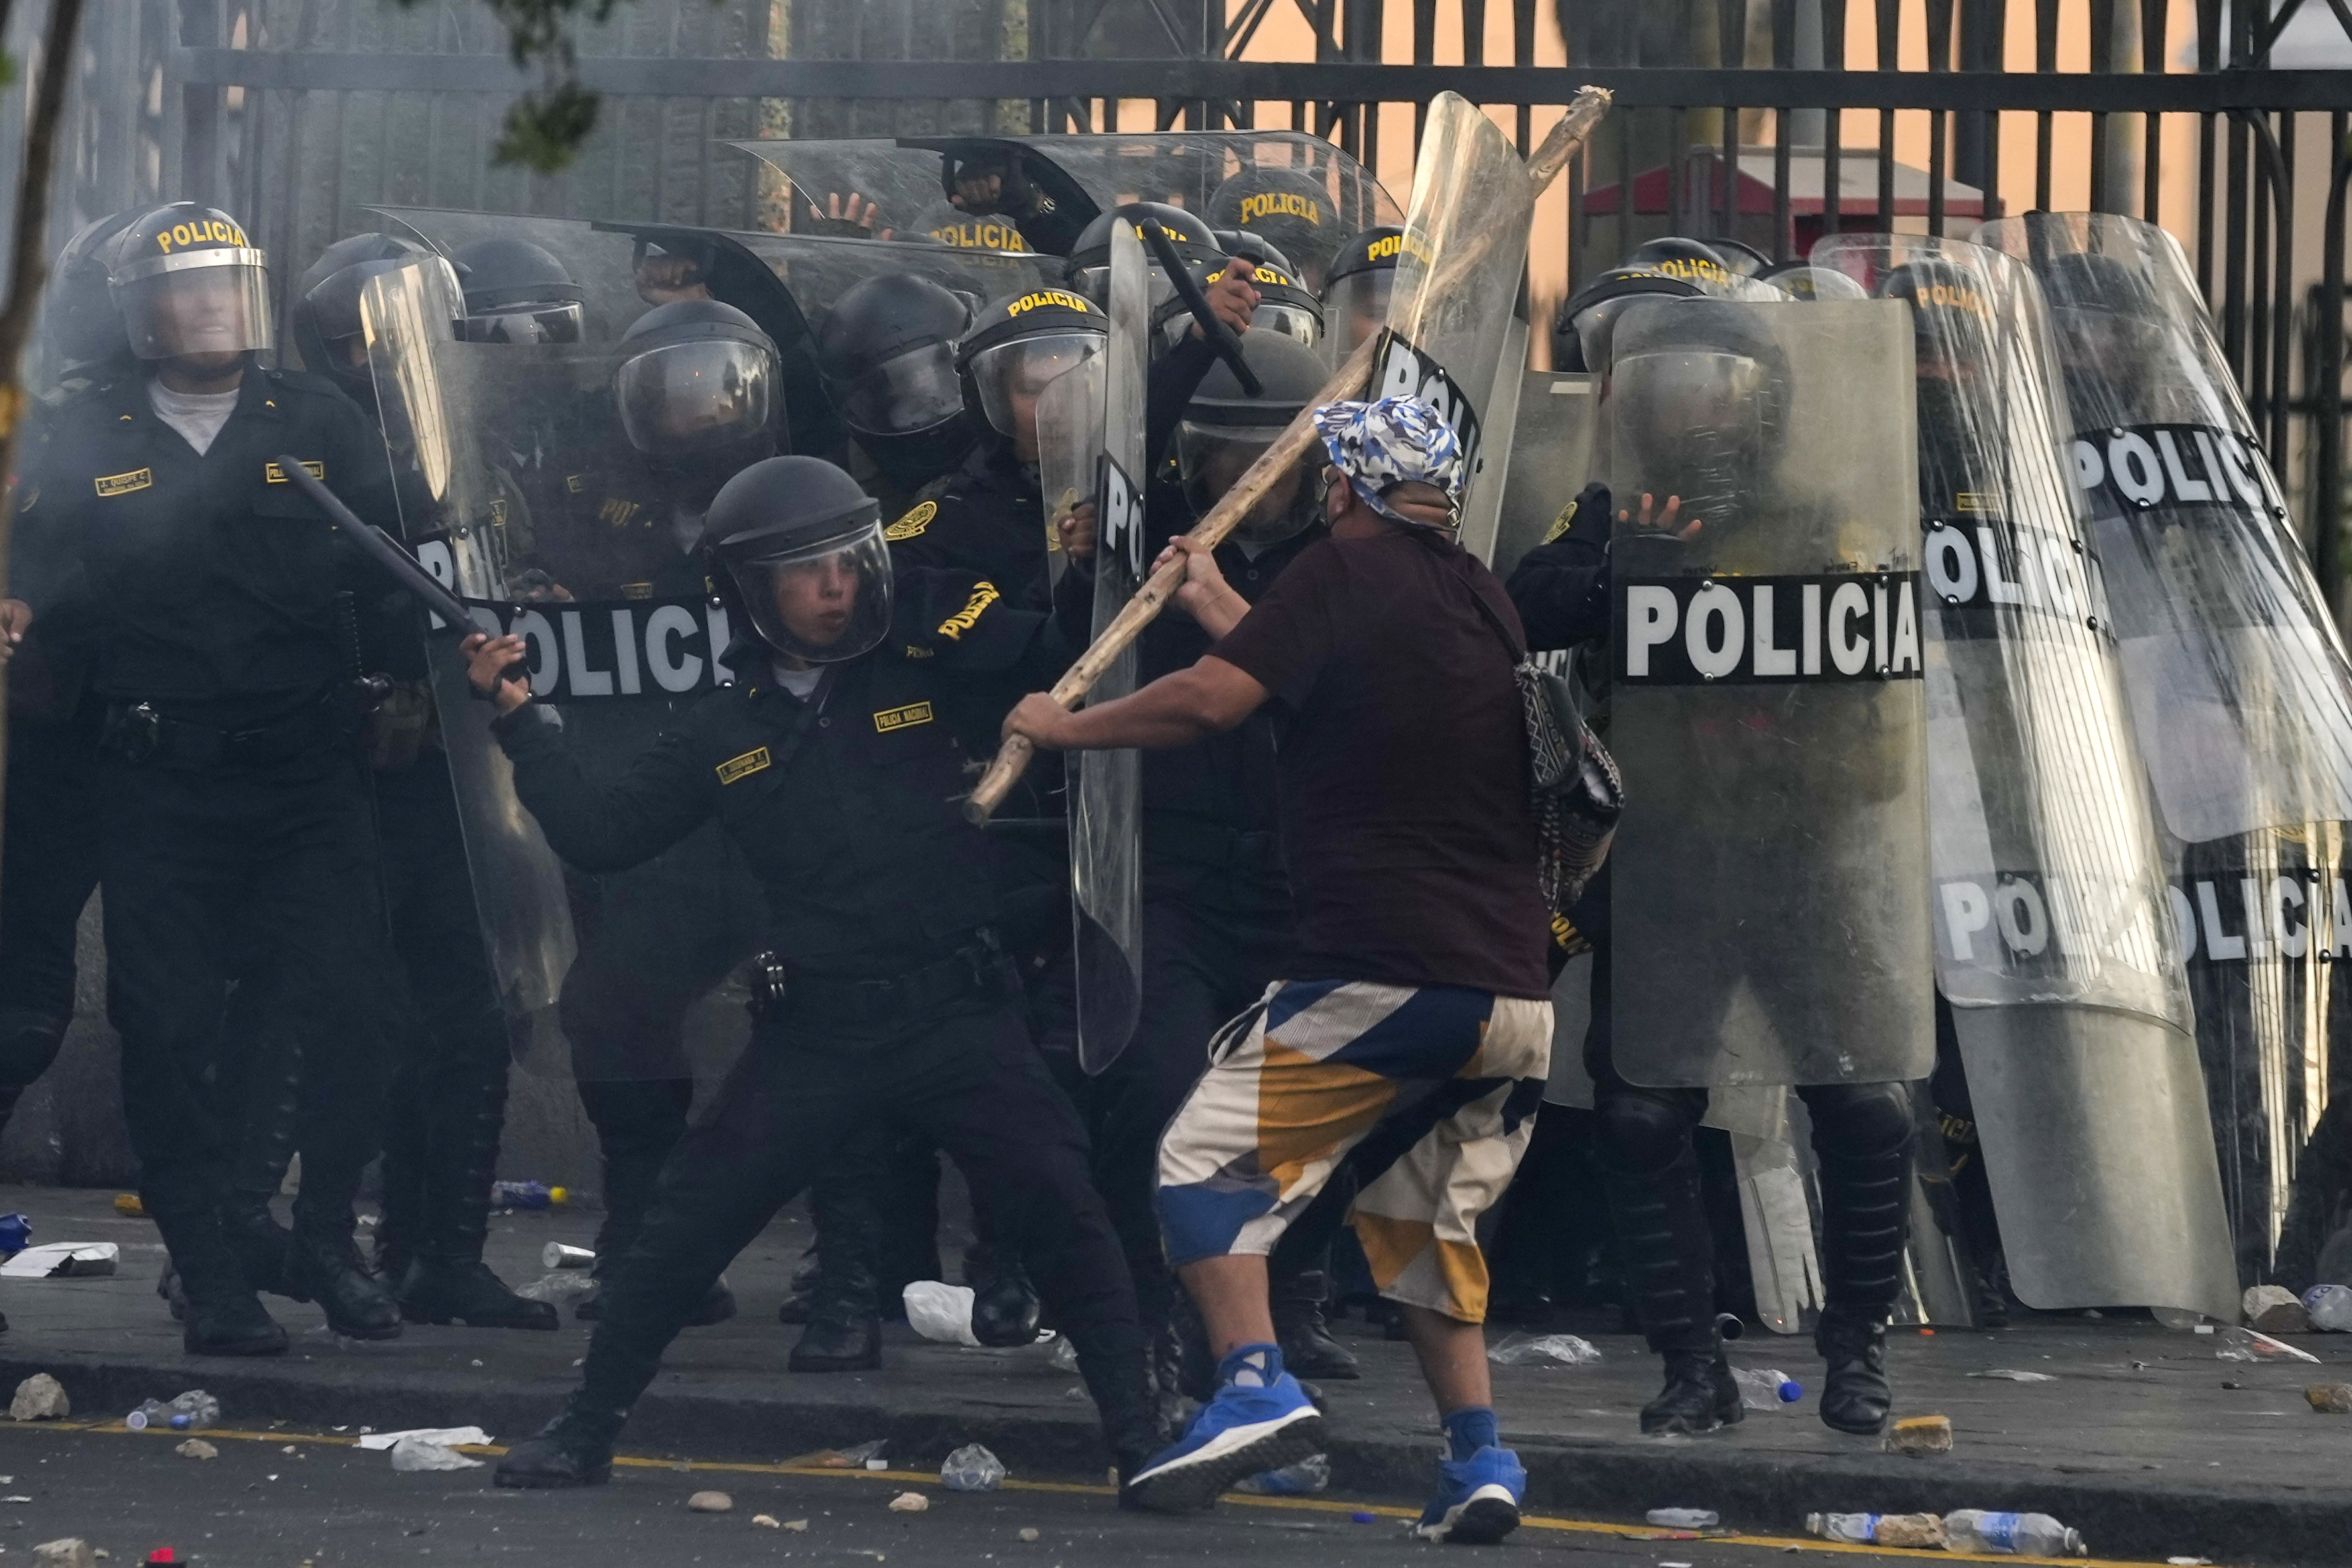 An anti-government protester and riot police clash during a demonstration in Lima, Peru, Thursday, Jan. 19, 2023. (AP Photo/Martin Mejia)